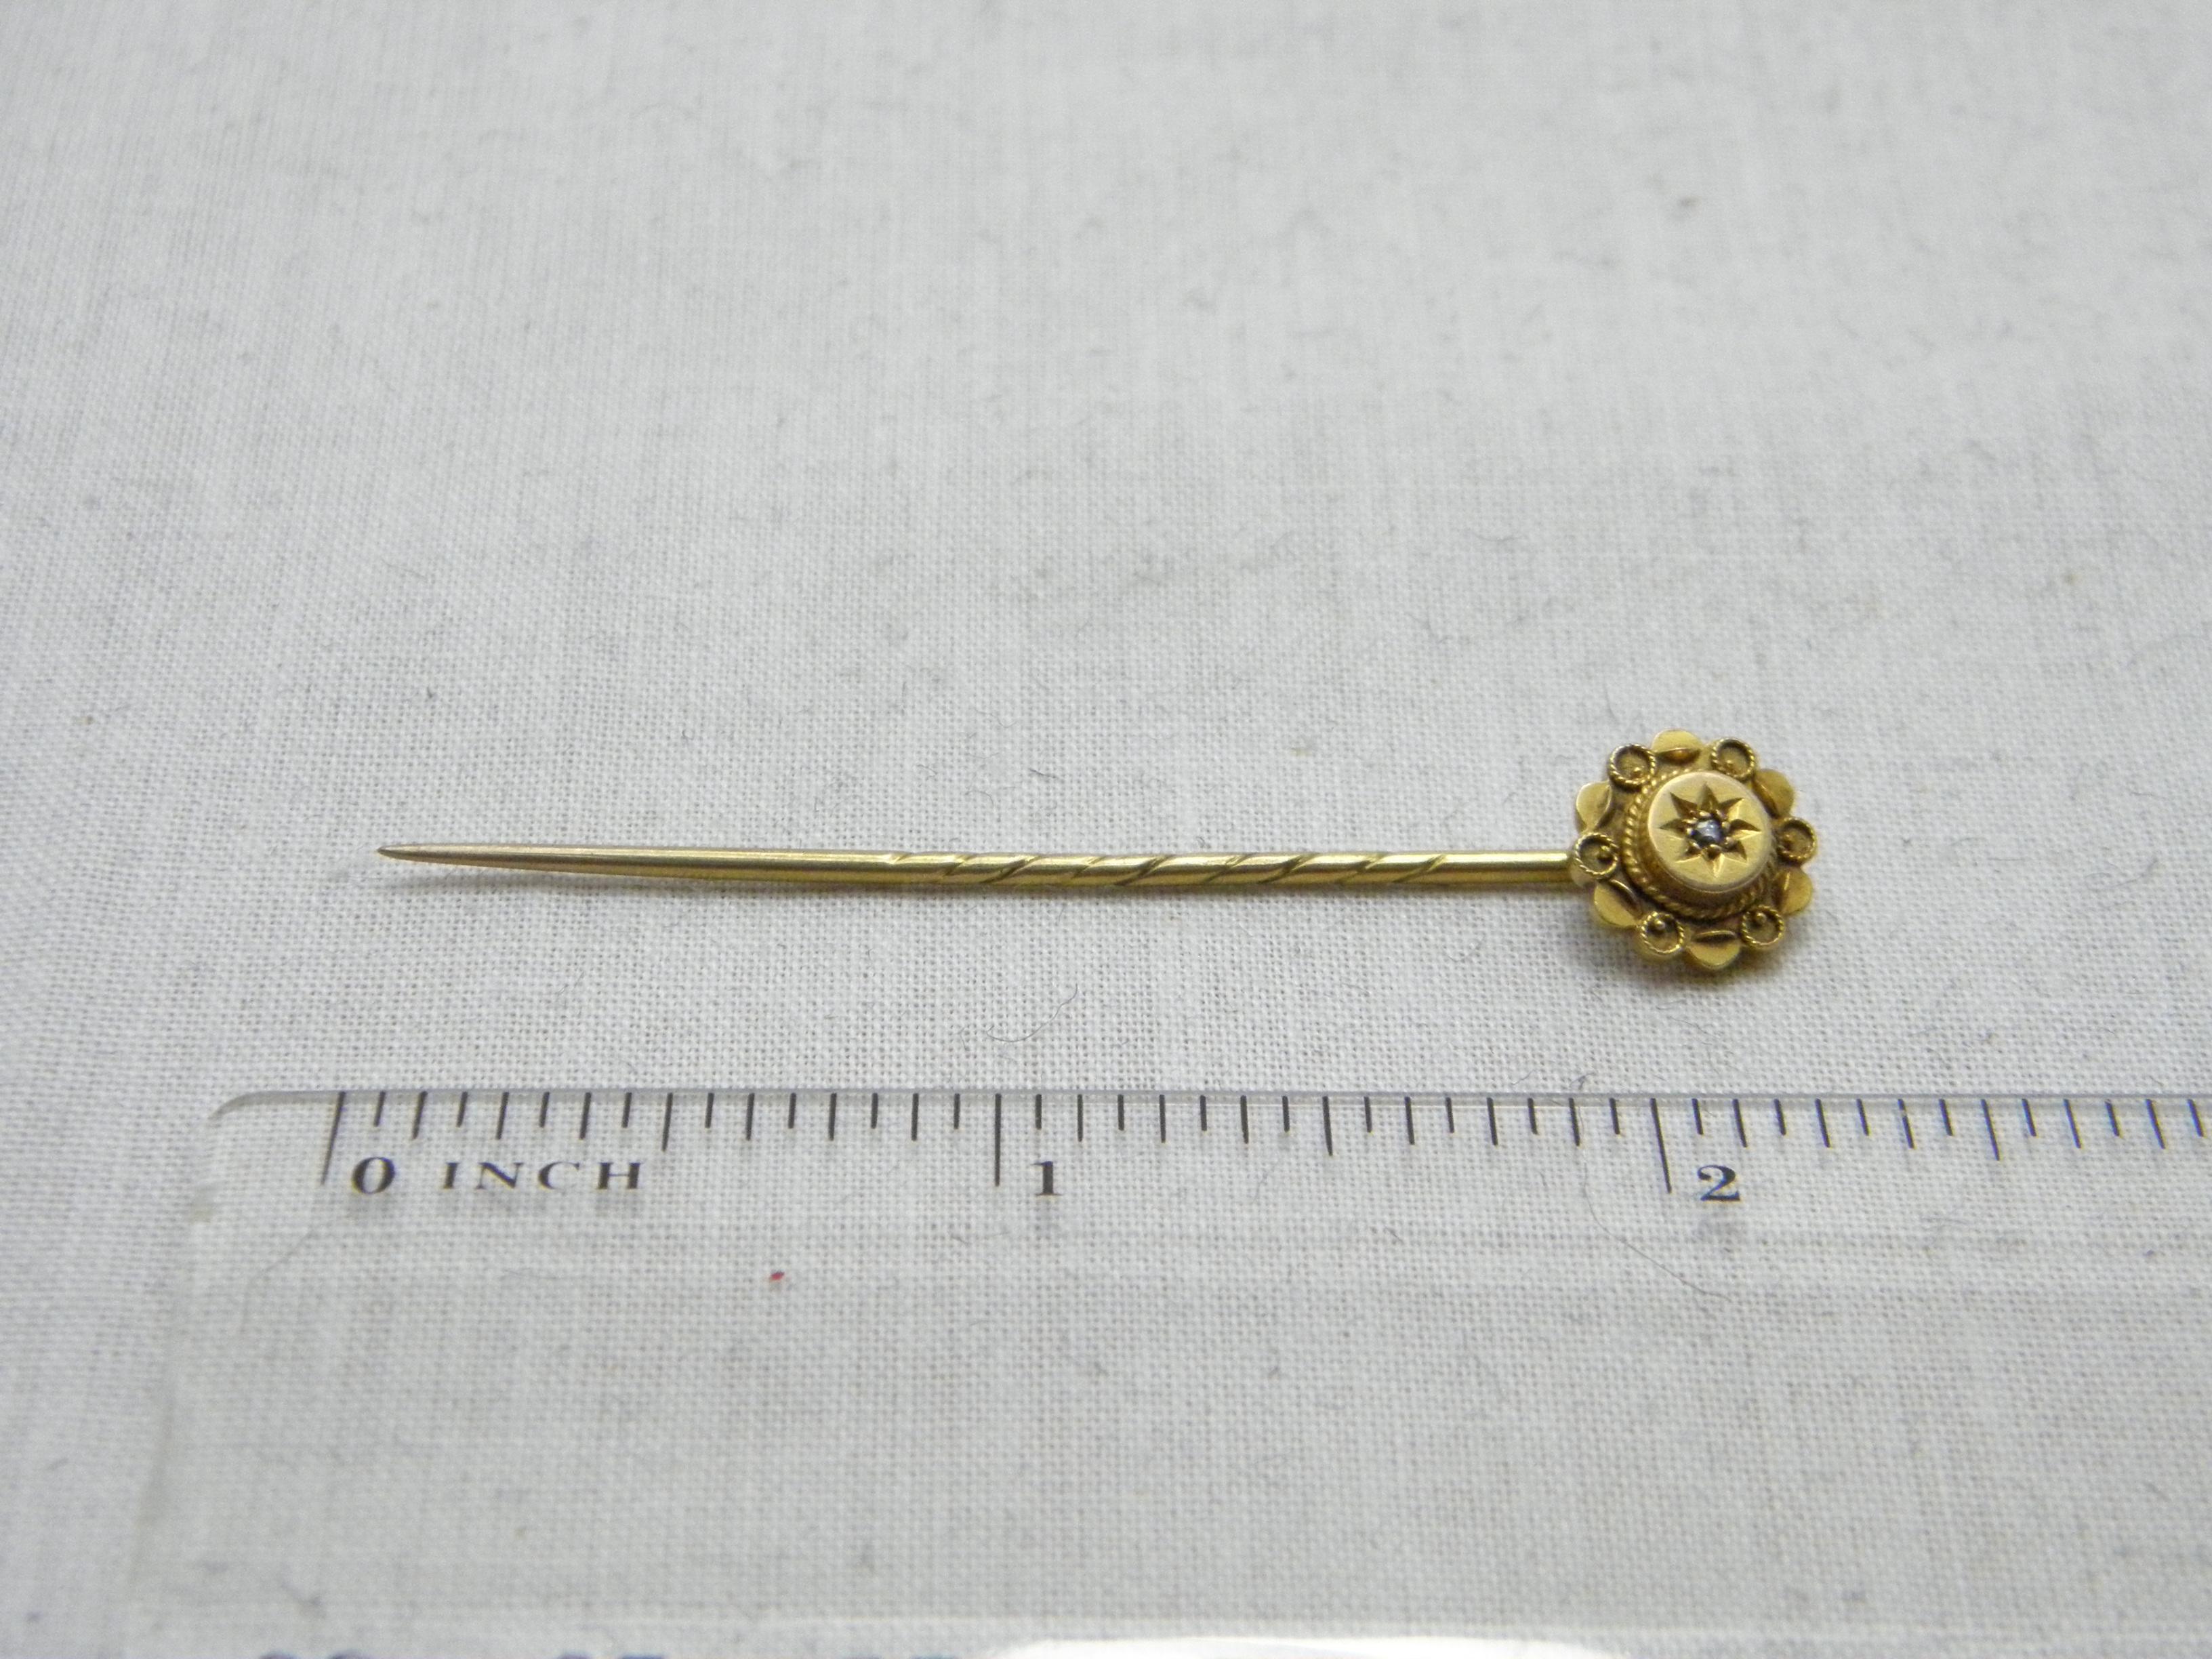 Antique 15ct Gold Diamond Stock Pin Brooch c1880 Heavy 625 Purity Tie Lapel Hat For Sale 4